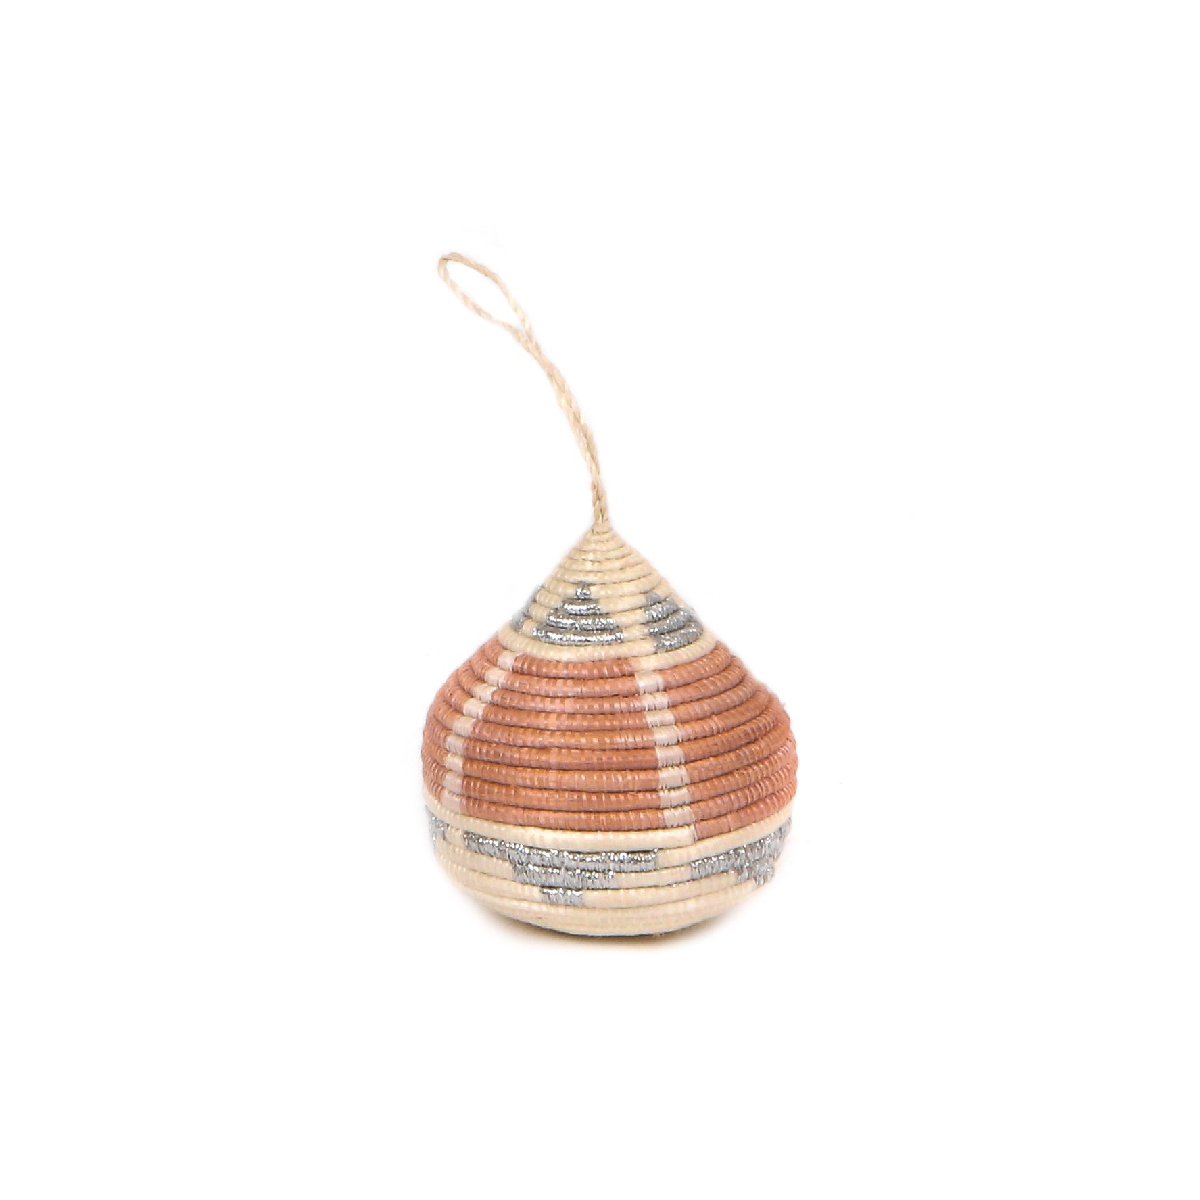 African woven bulb ornament | apricot silver